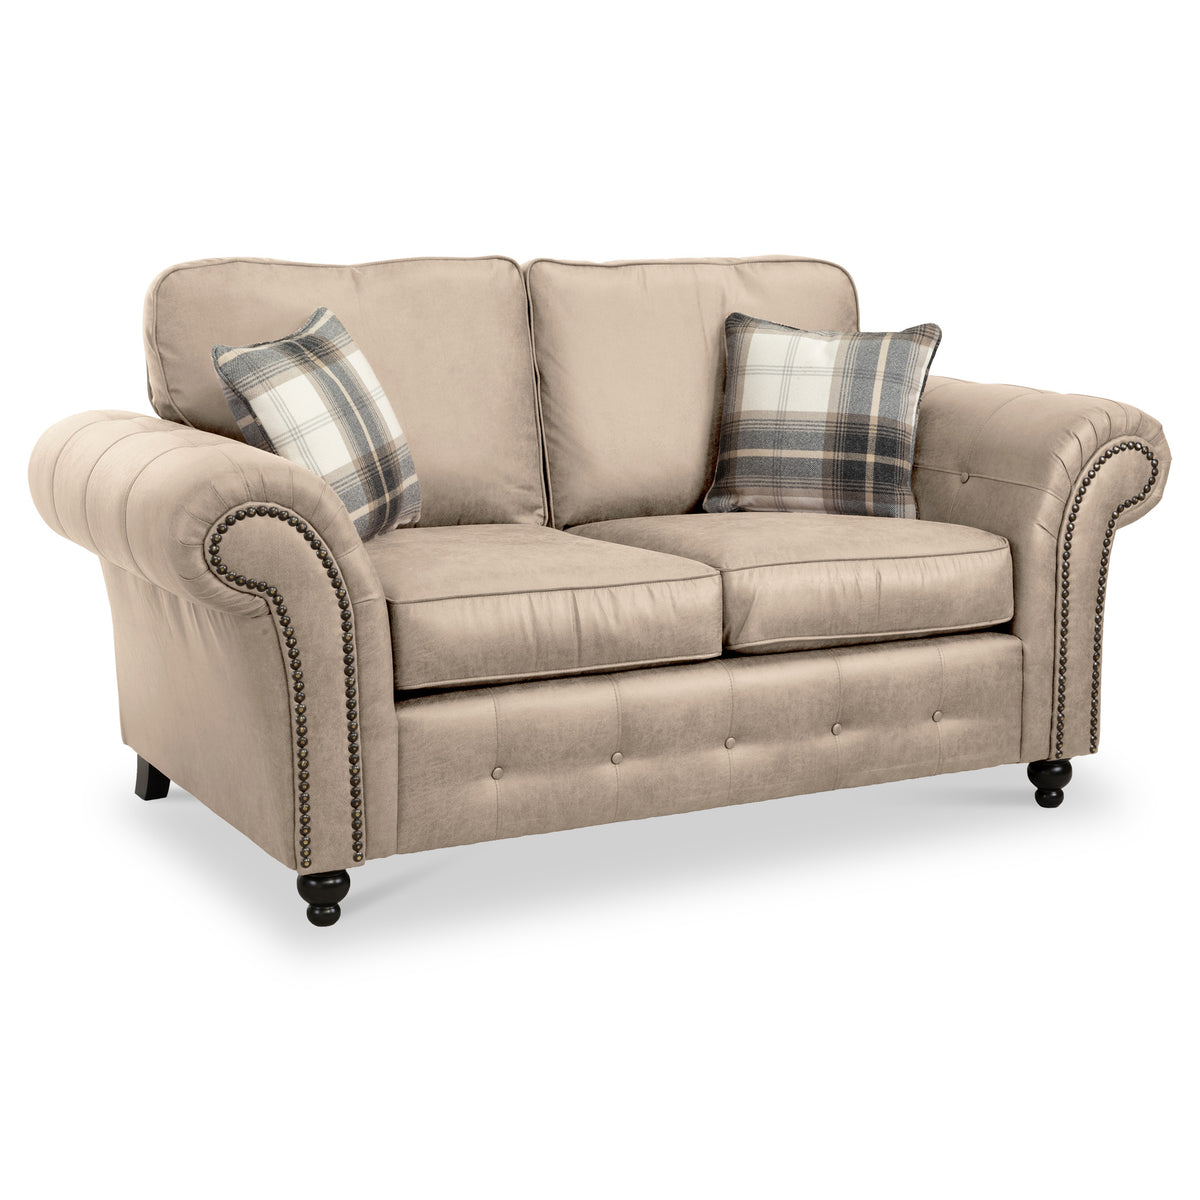 Edward Marble Faux Leather 2 Seater Sofa from Roseland Furniture